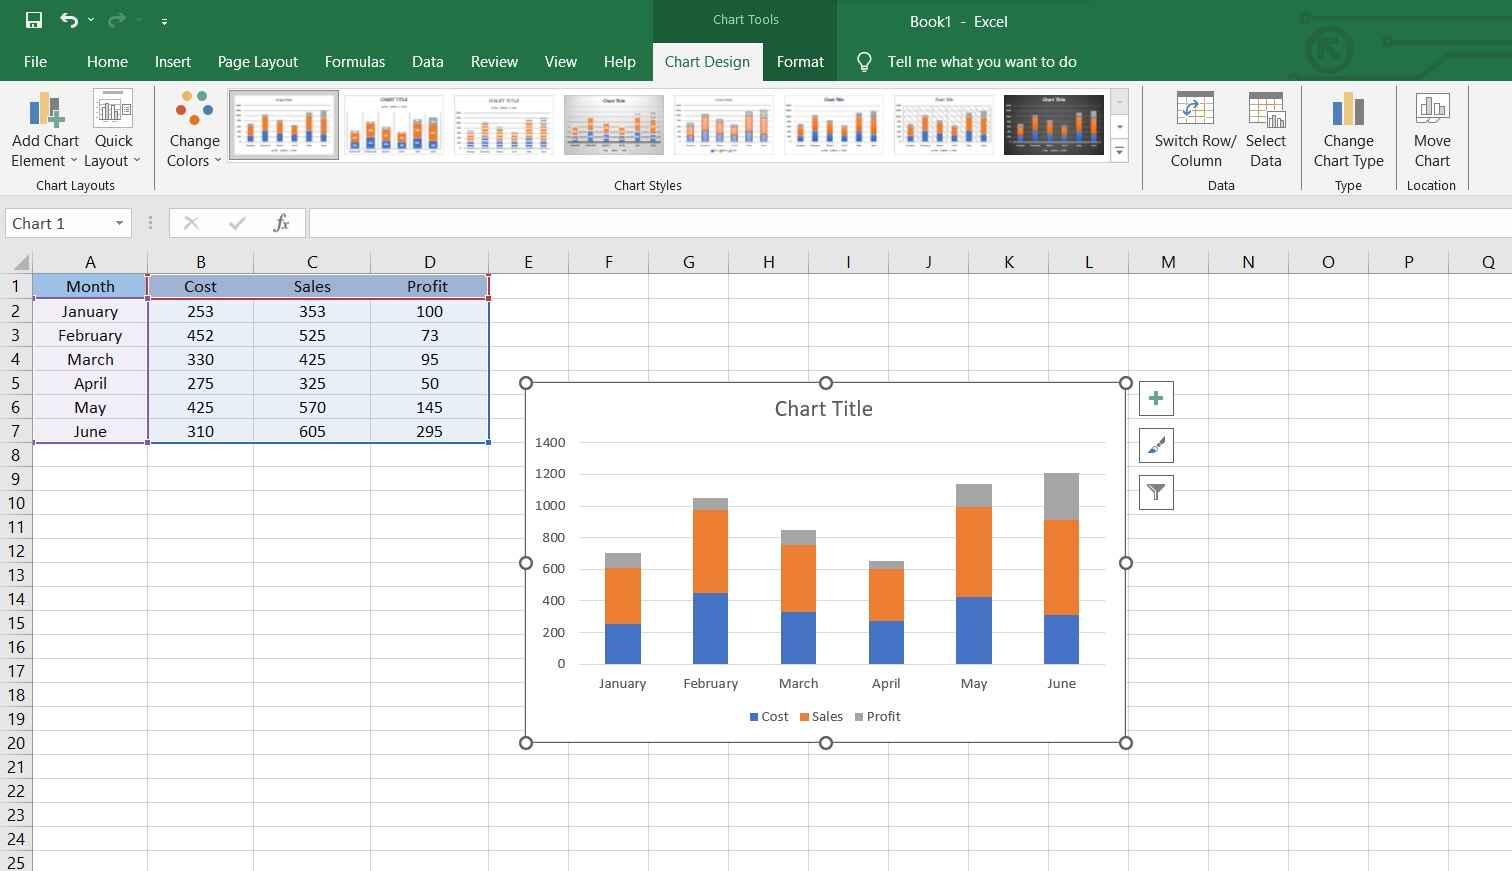 How to Create a Stacked Bar Chart in Excel With 3 Variables